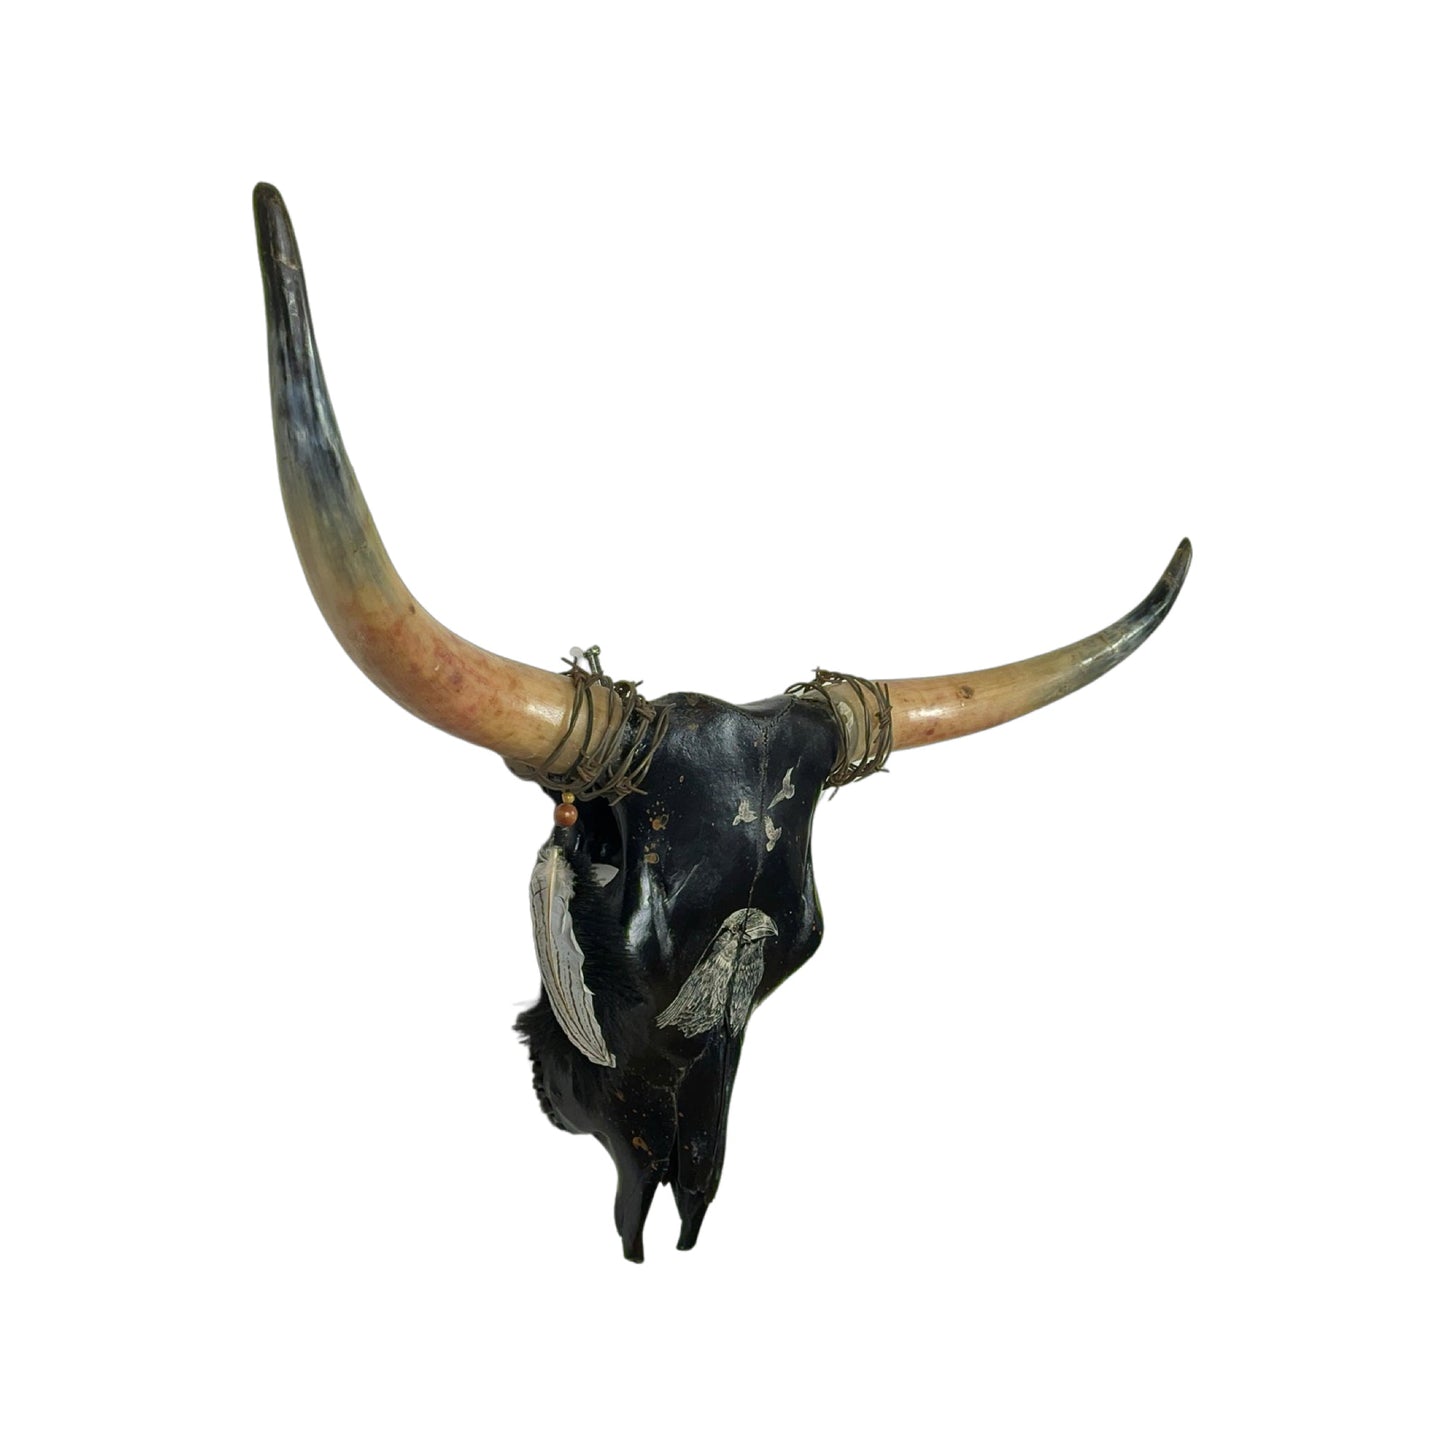 A Longhorn Engraved Skull Taxidermy Wall Decor featuring a large crow bird and 3 flying crows